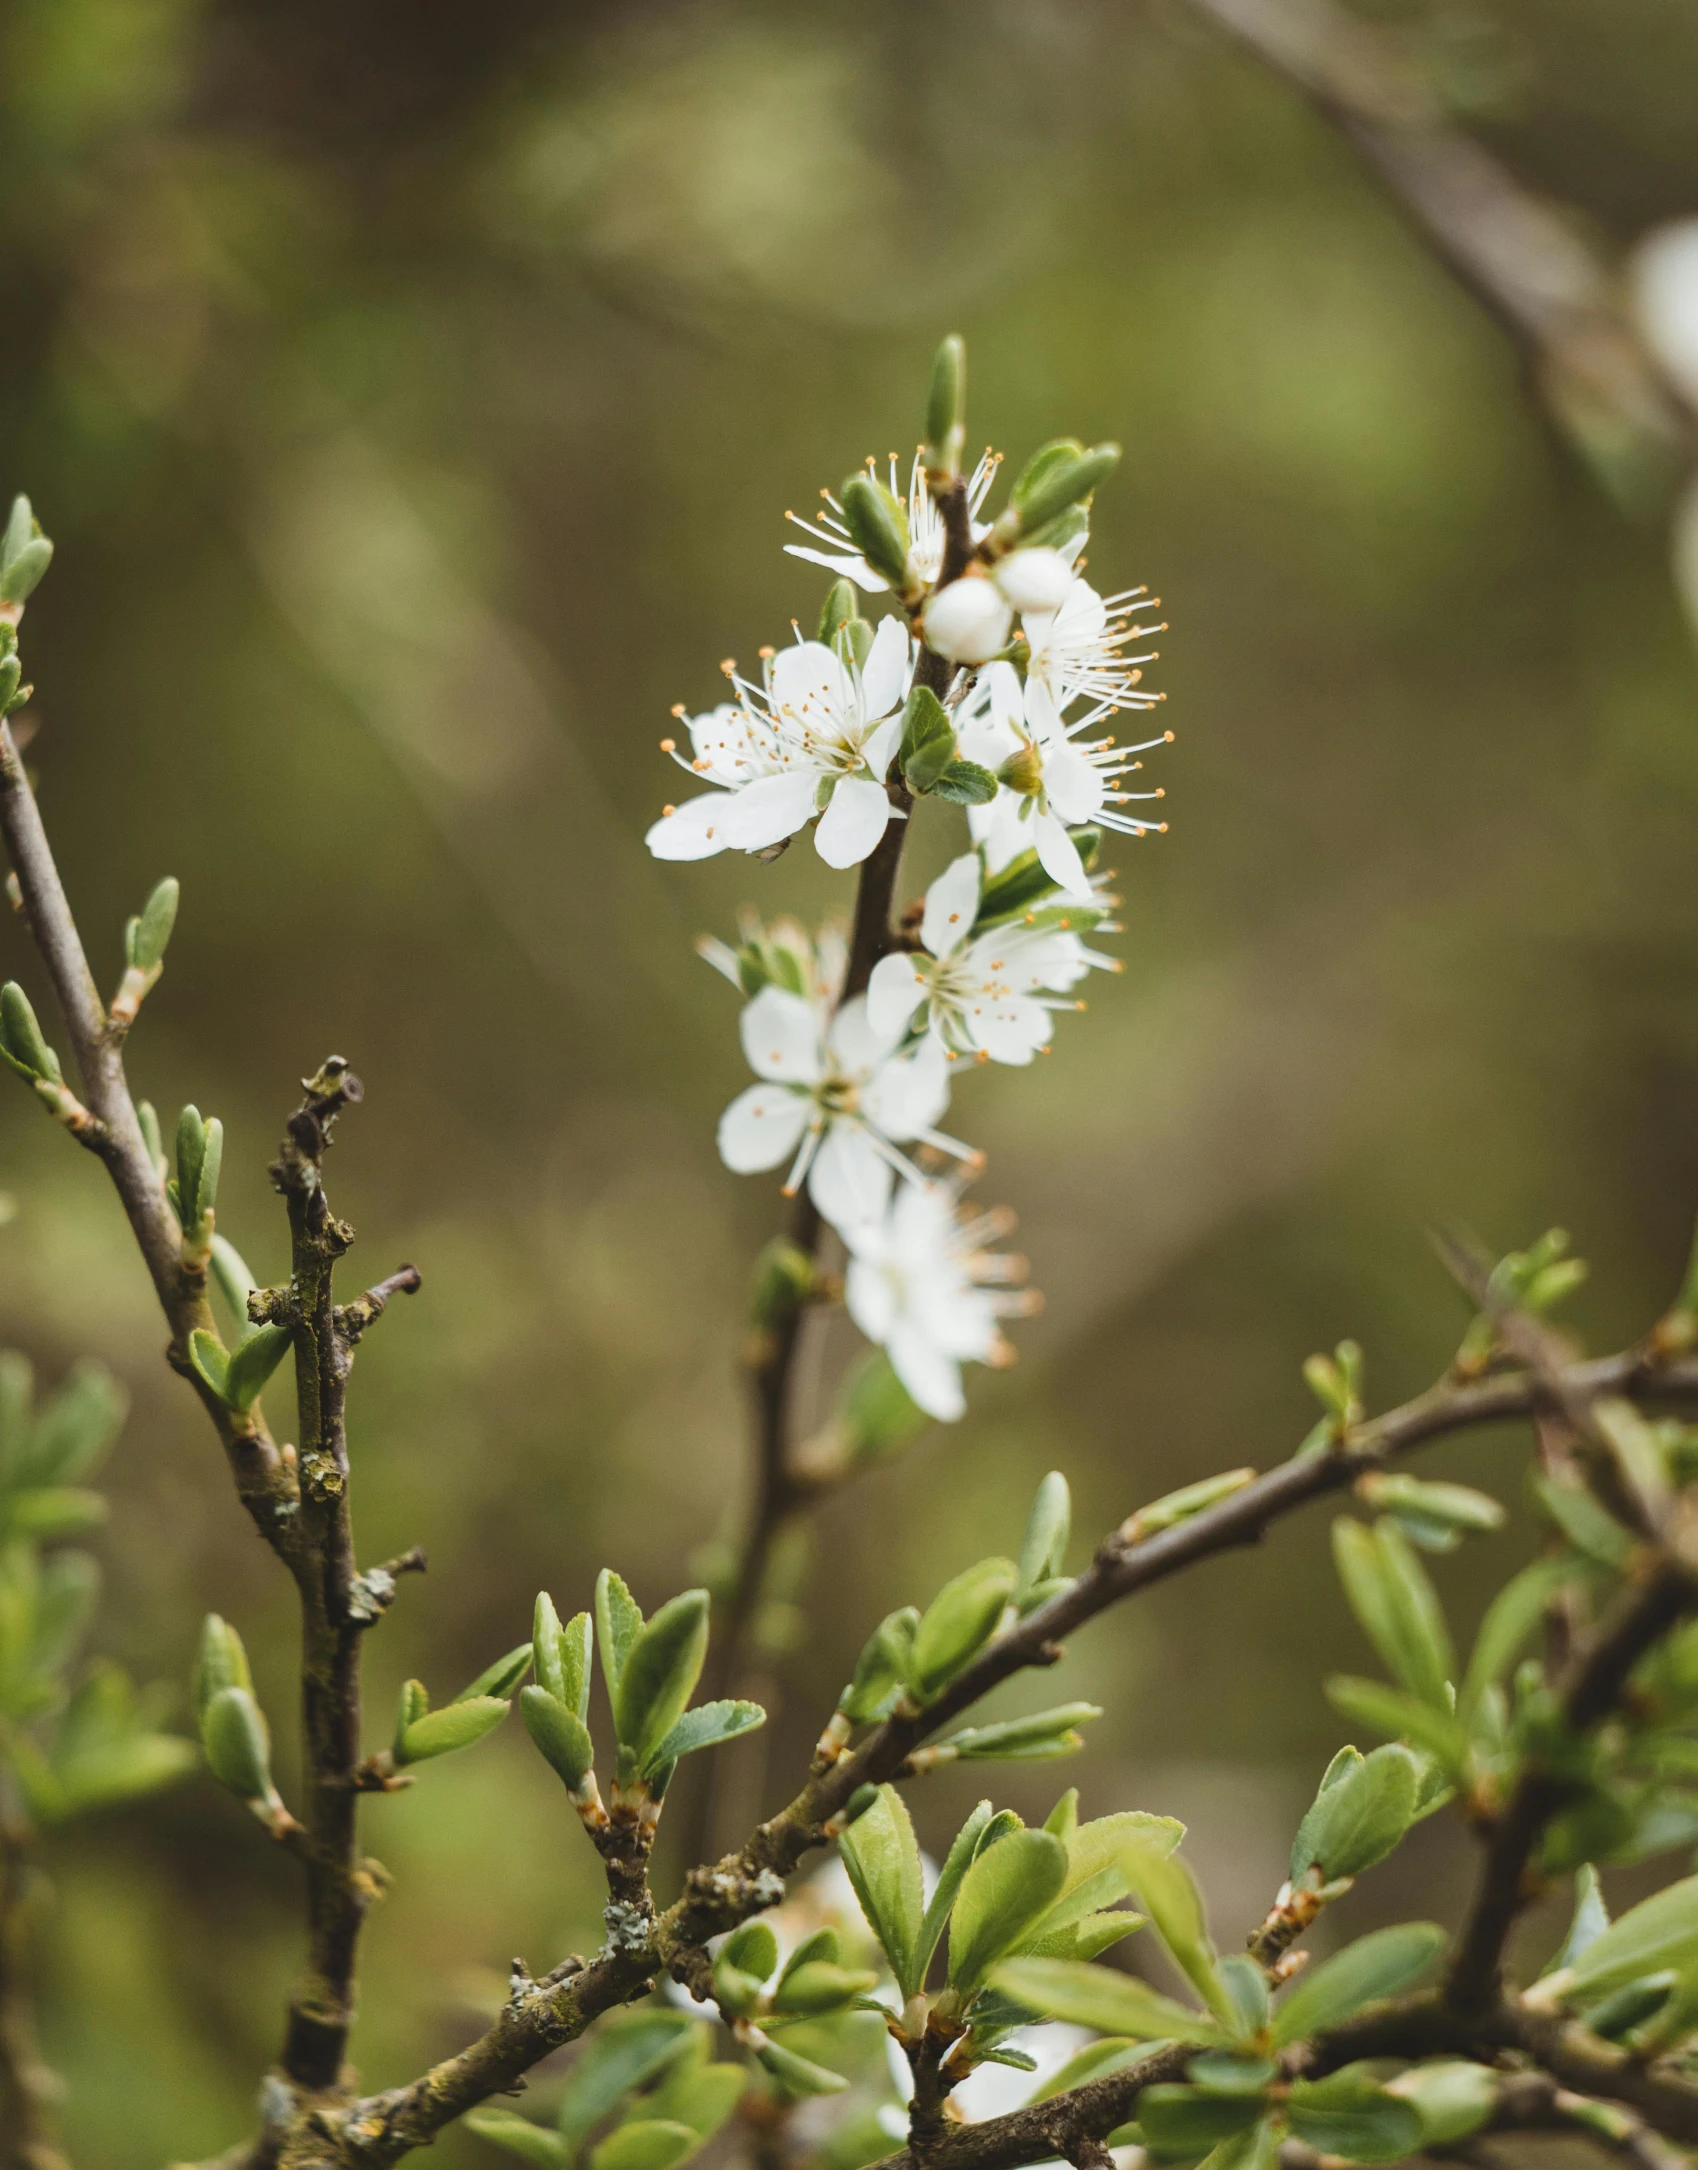 a close up of a flower on a tree, woodland location, fruit trees, green and white, carefully crafted